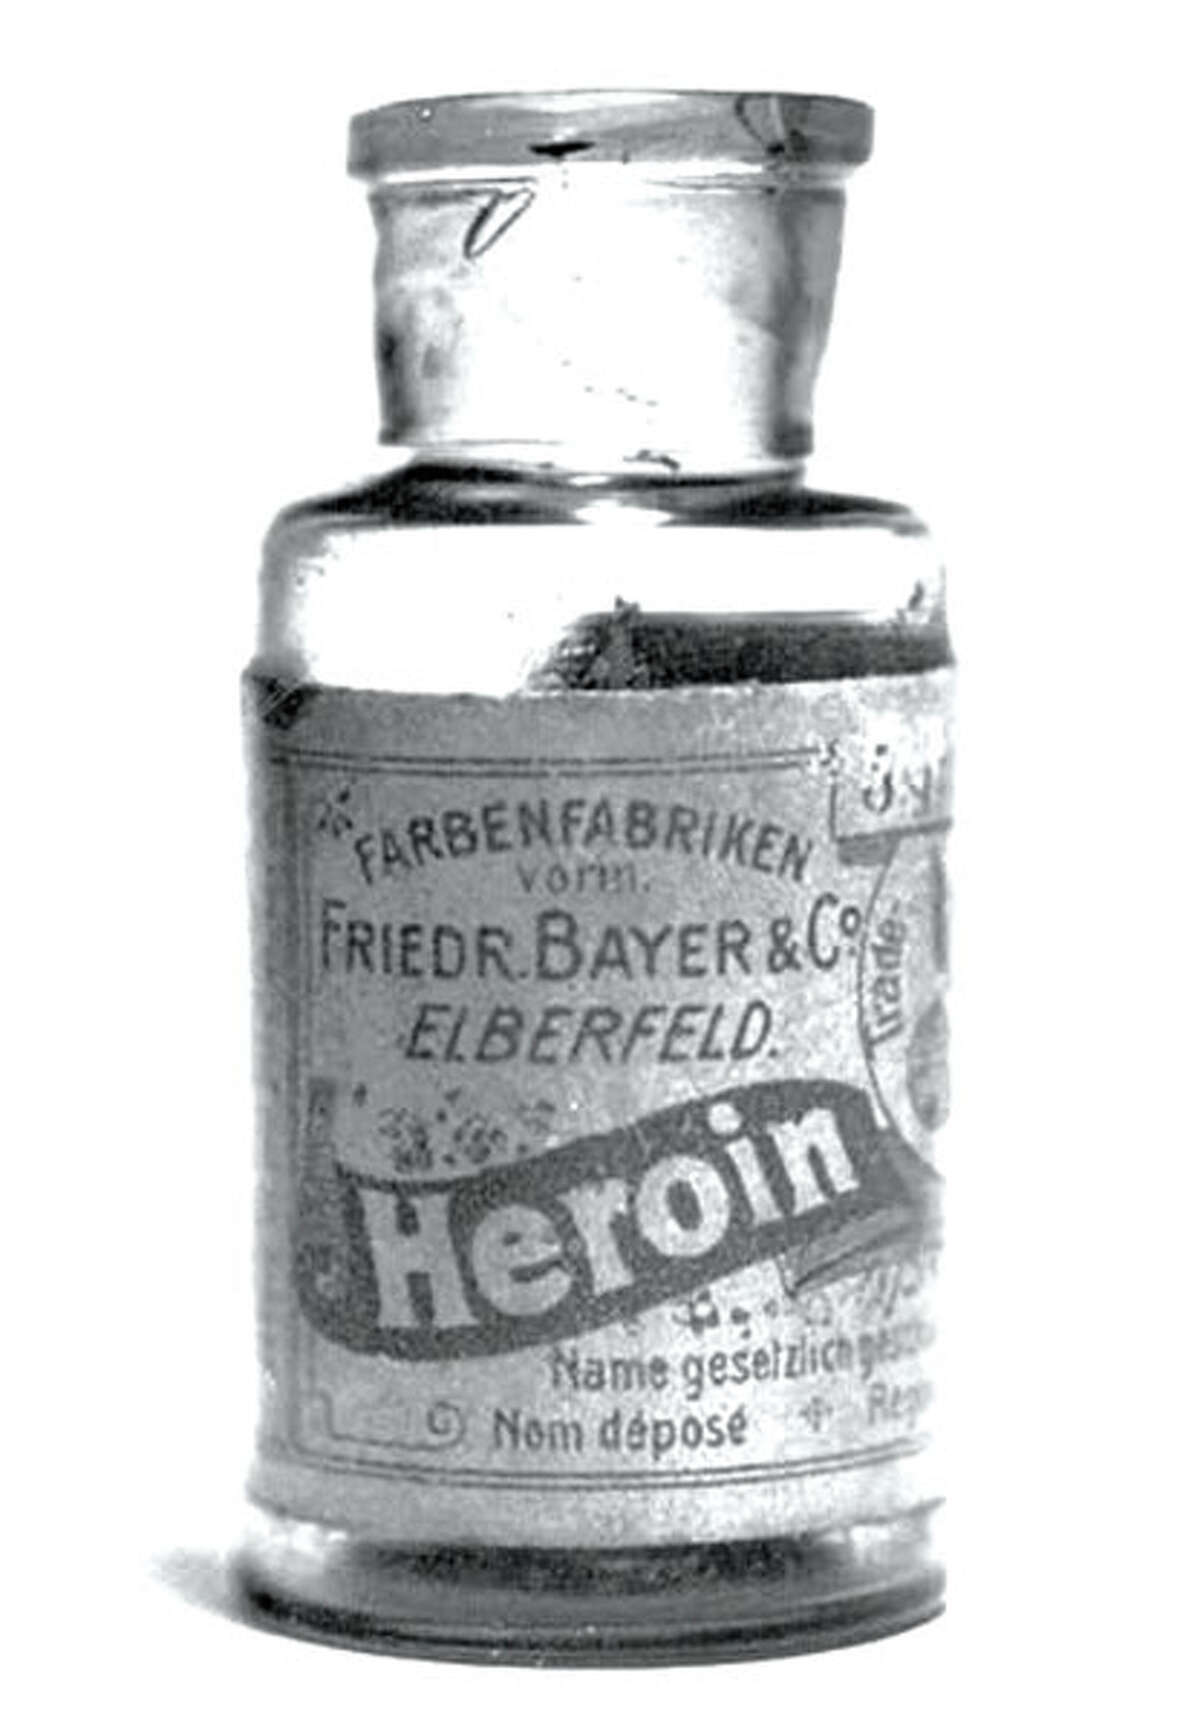 Drug History: One of the original bottles of Heroin produced by the Bayer Company.